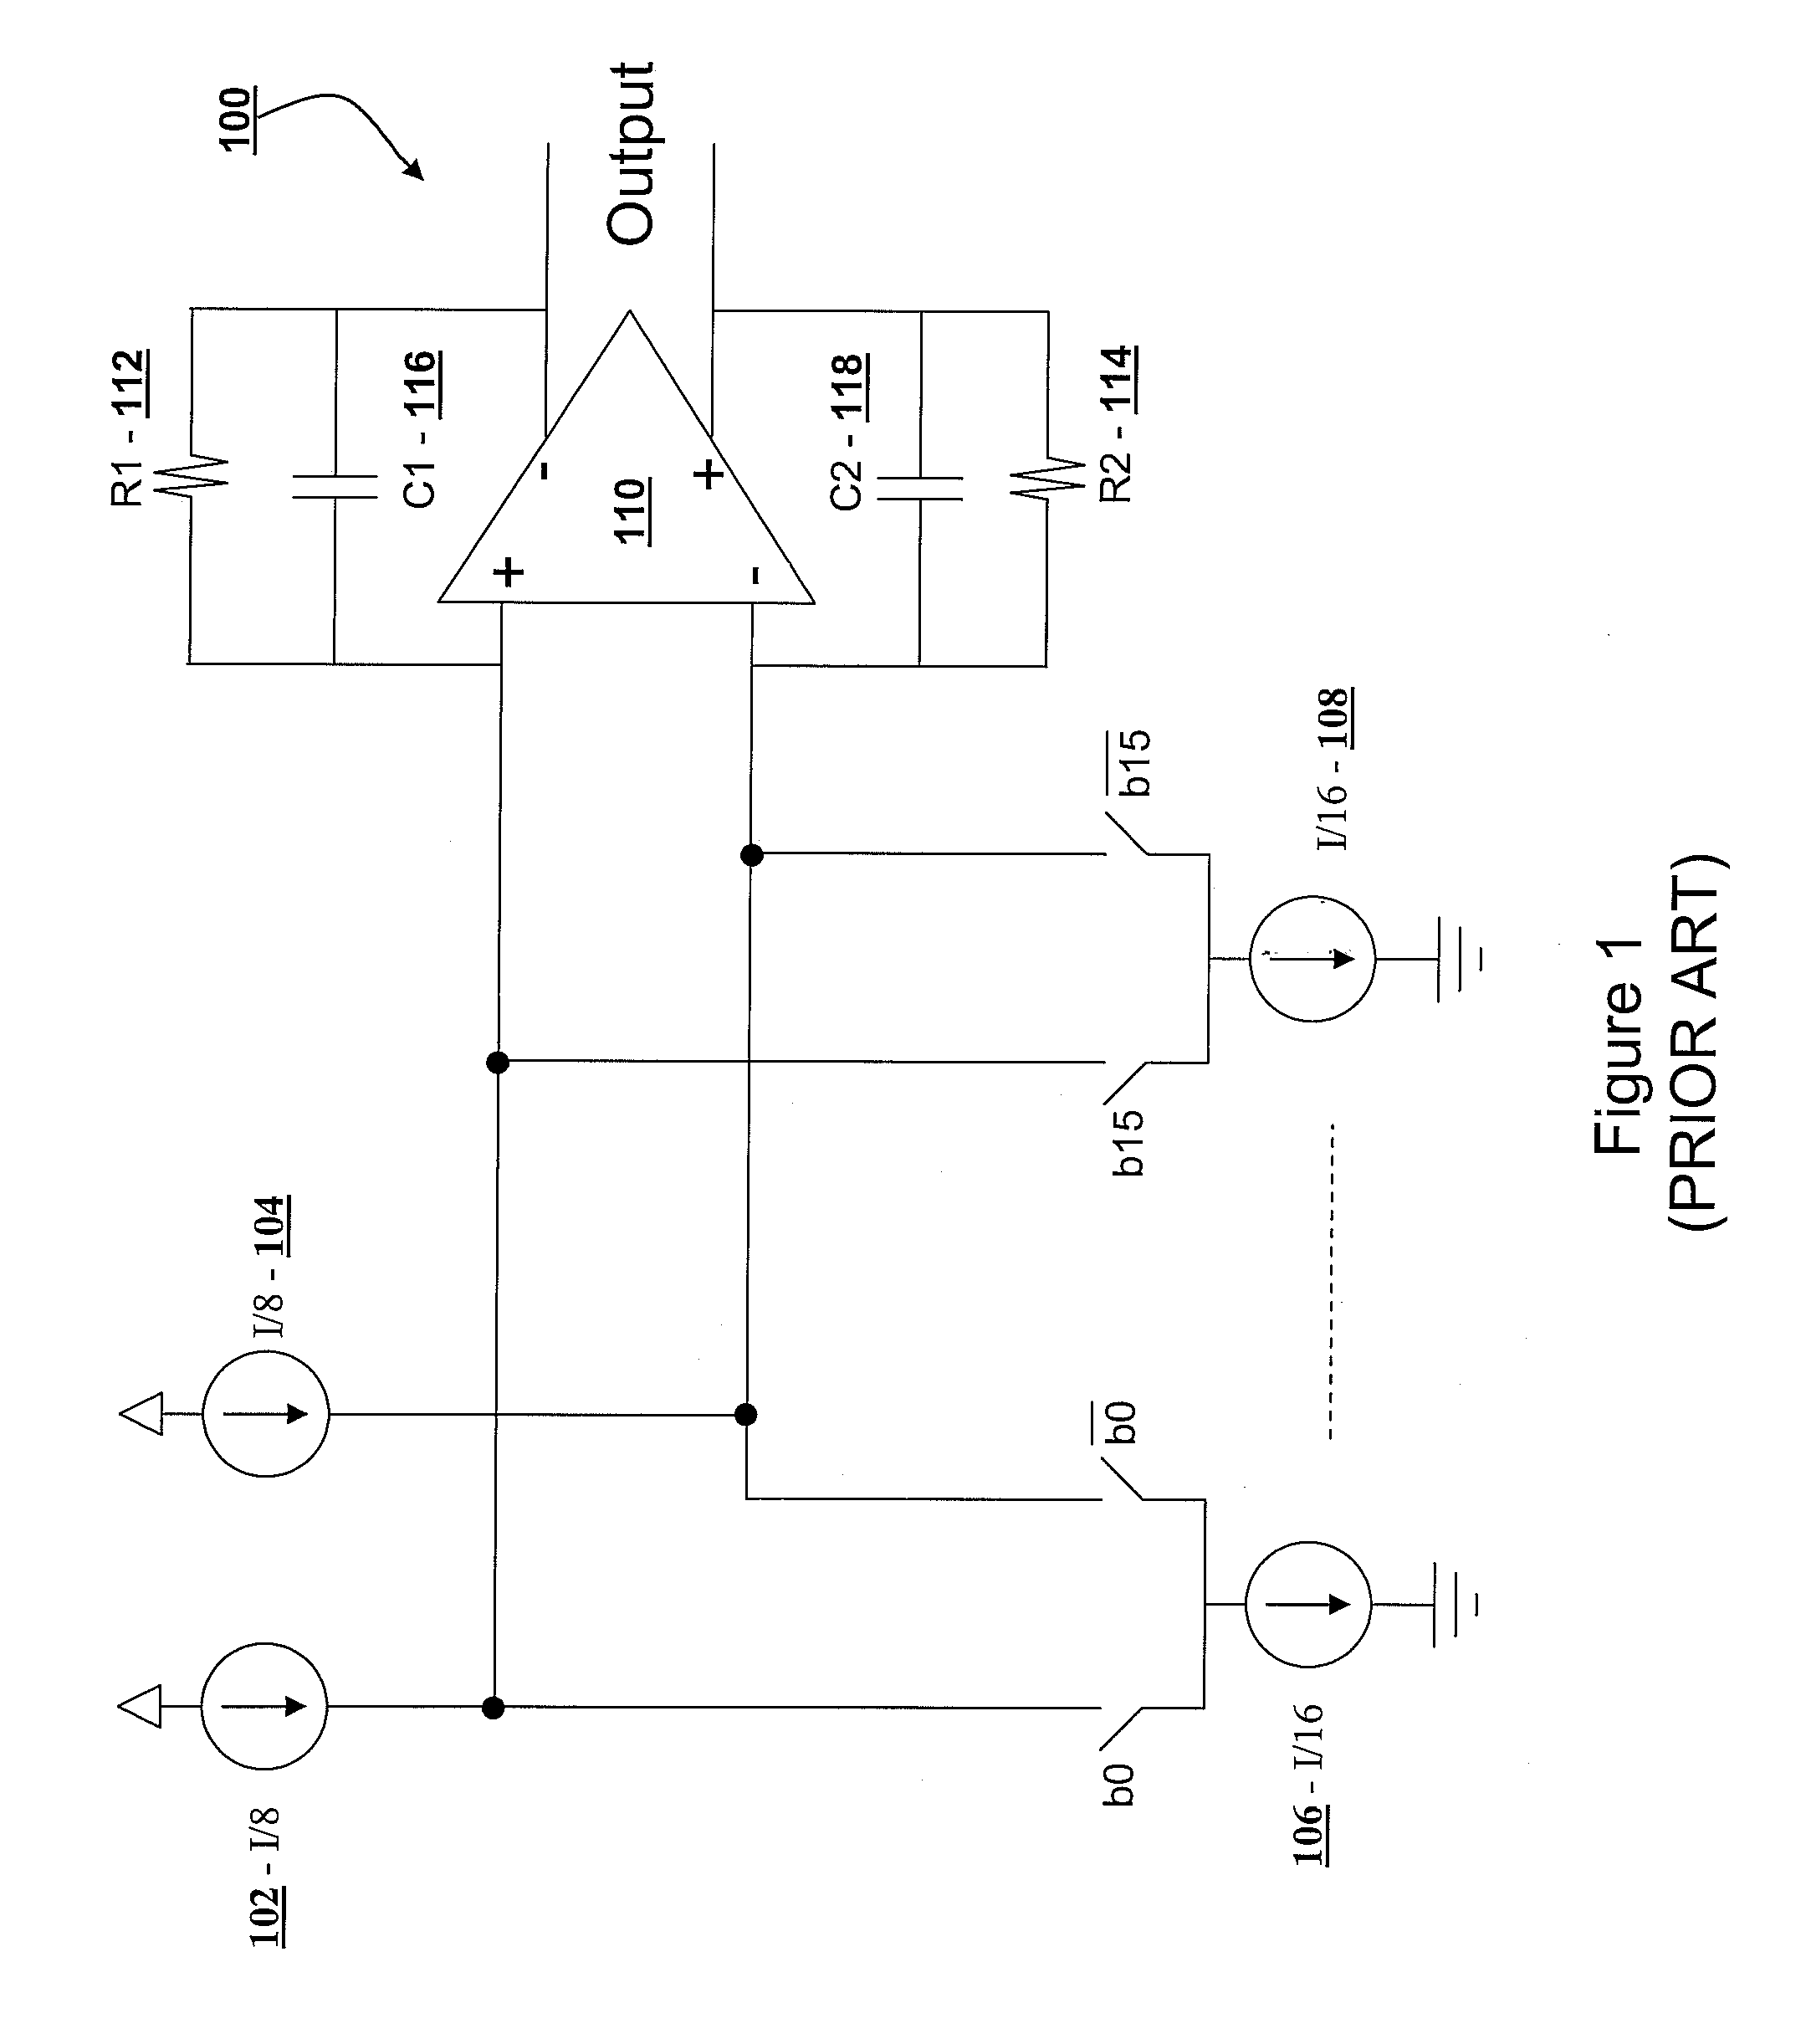 Return-to-hold switching scheme for DAC output stage